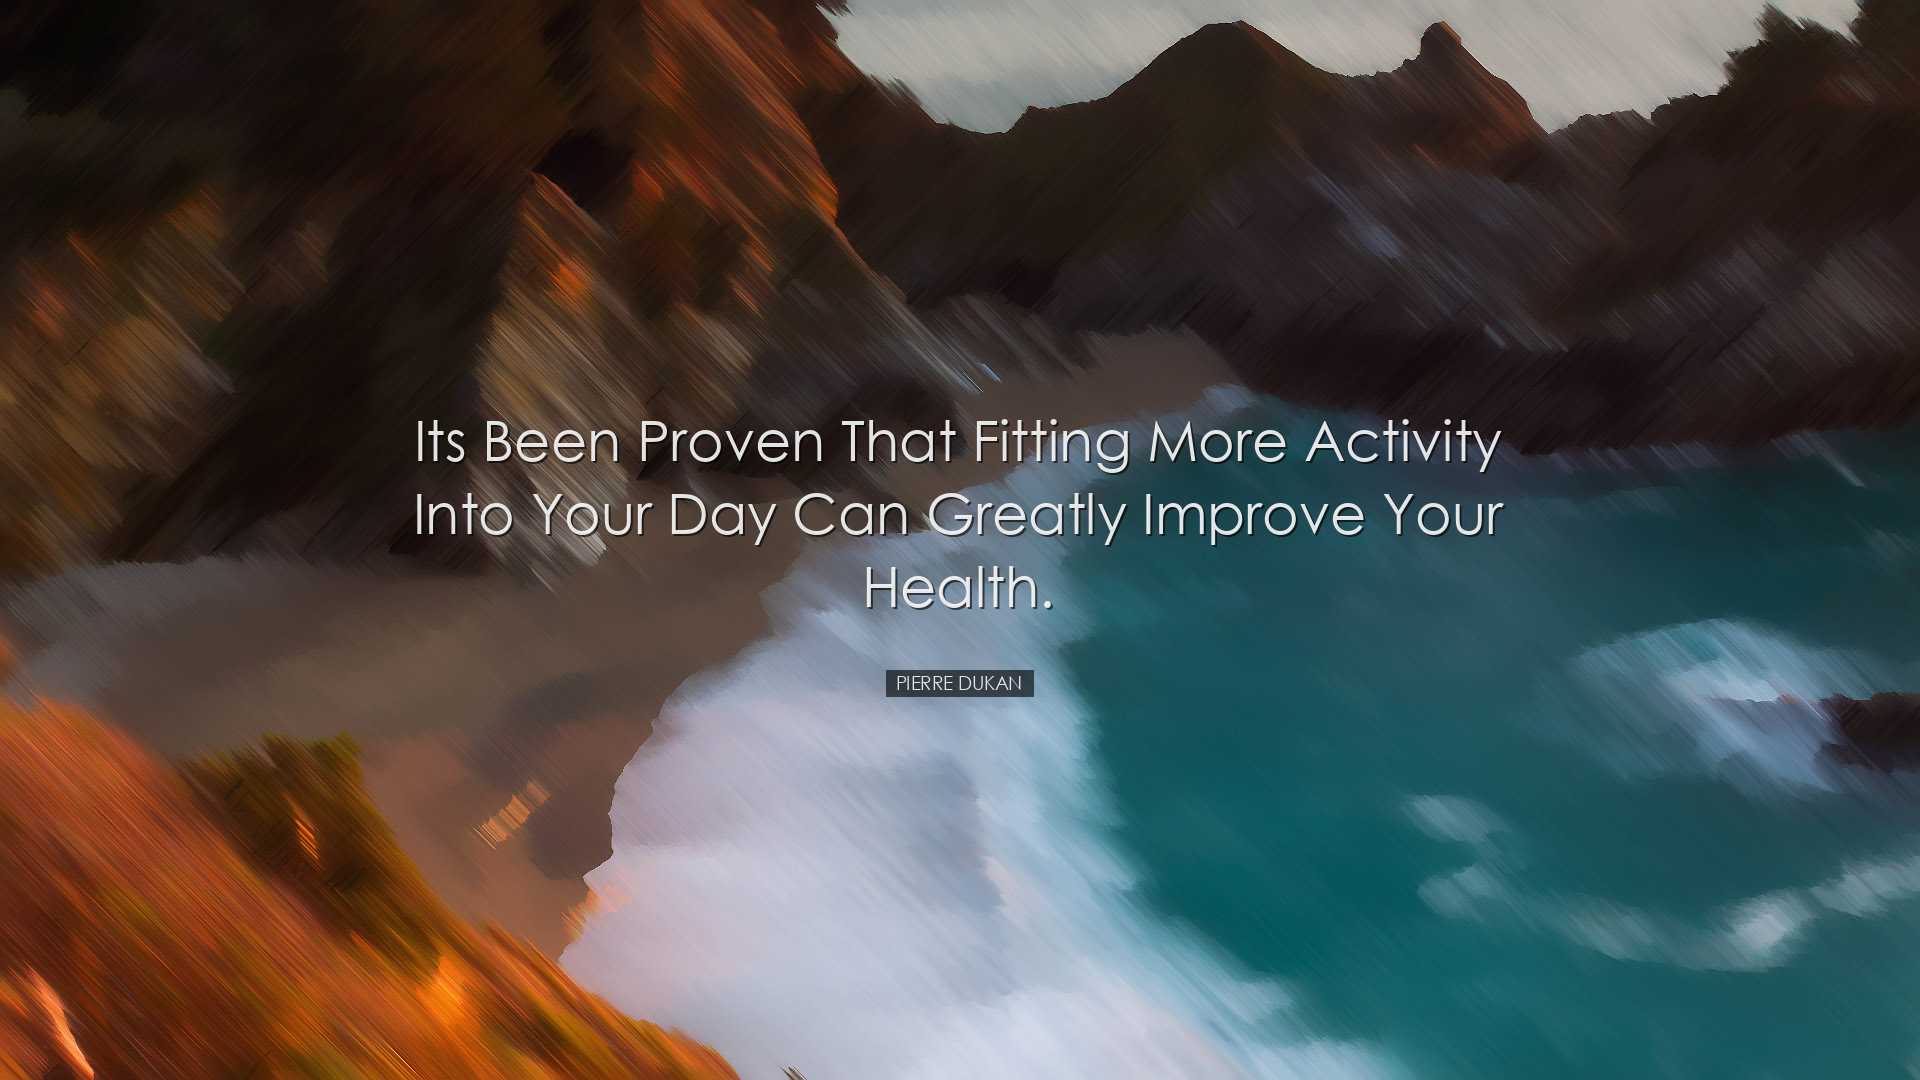 Its been proven that fitting more activity into your day can great